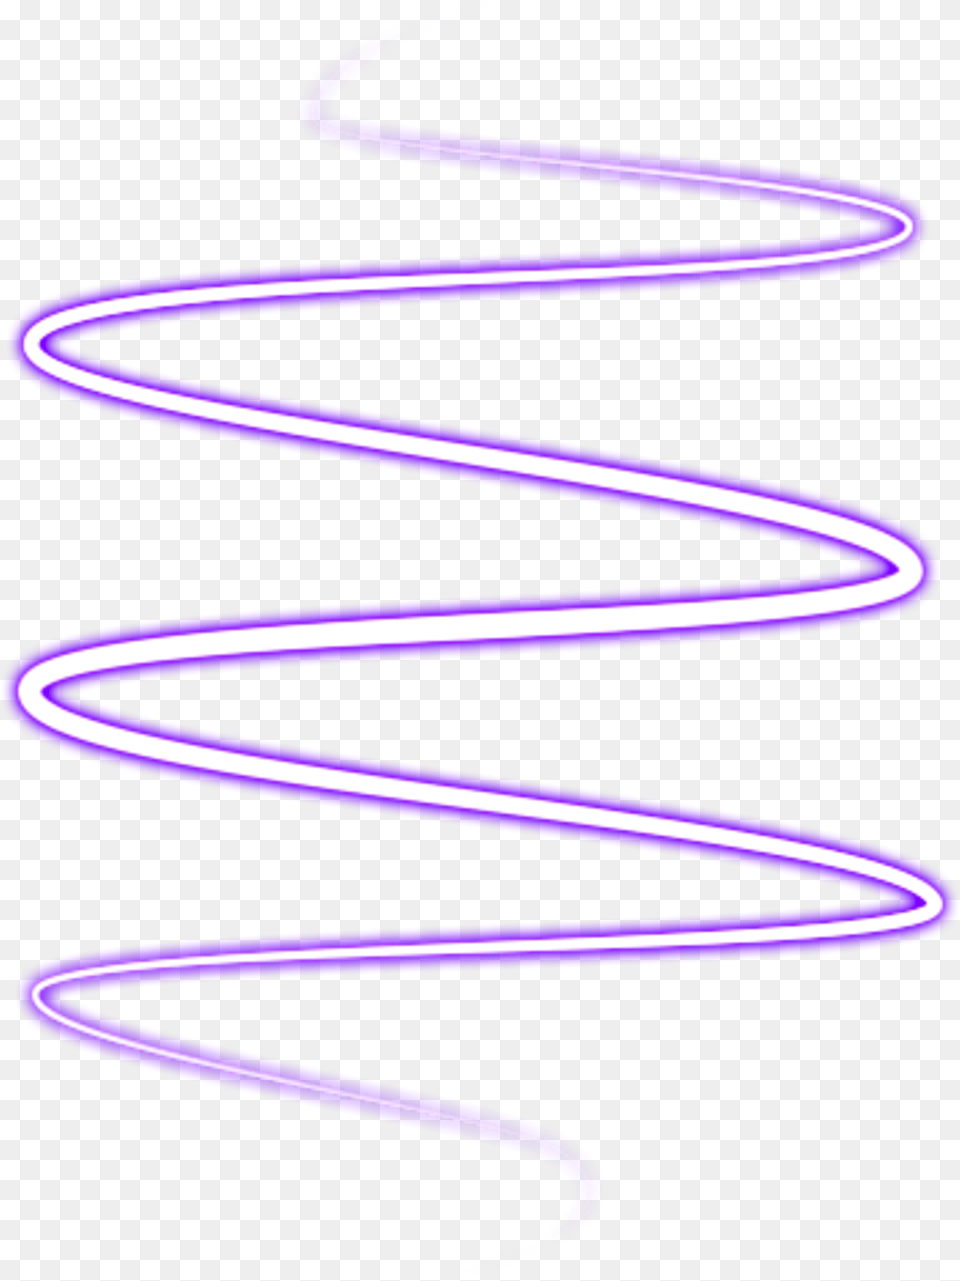 Freetoedit Picsart Lines, Coil, Light, Spiral, Neon Free Png Download